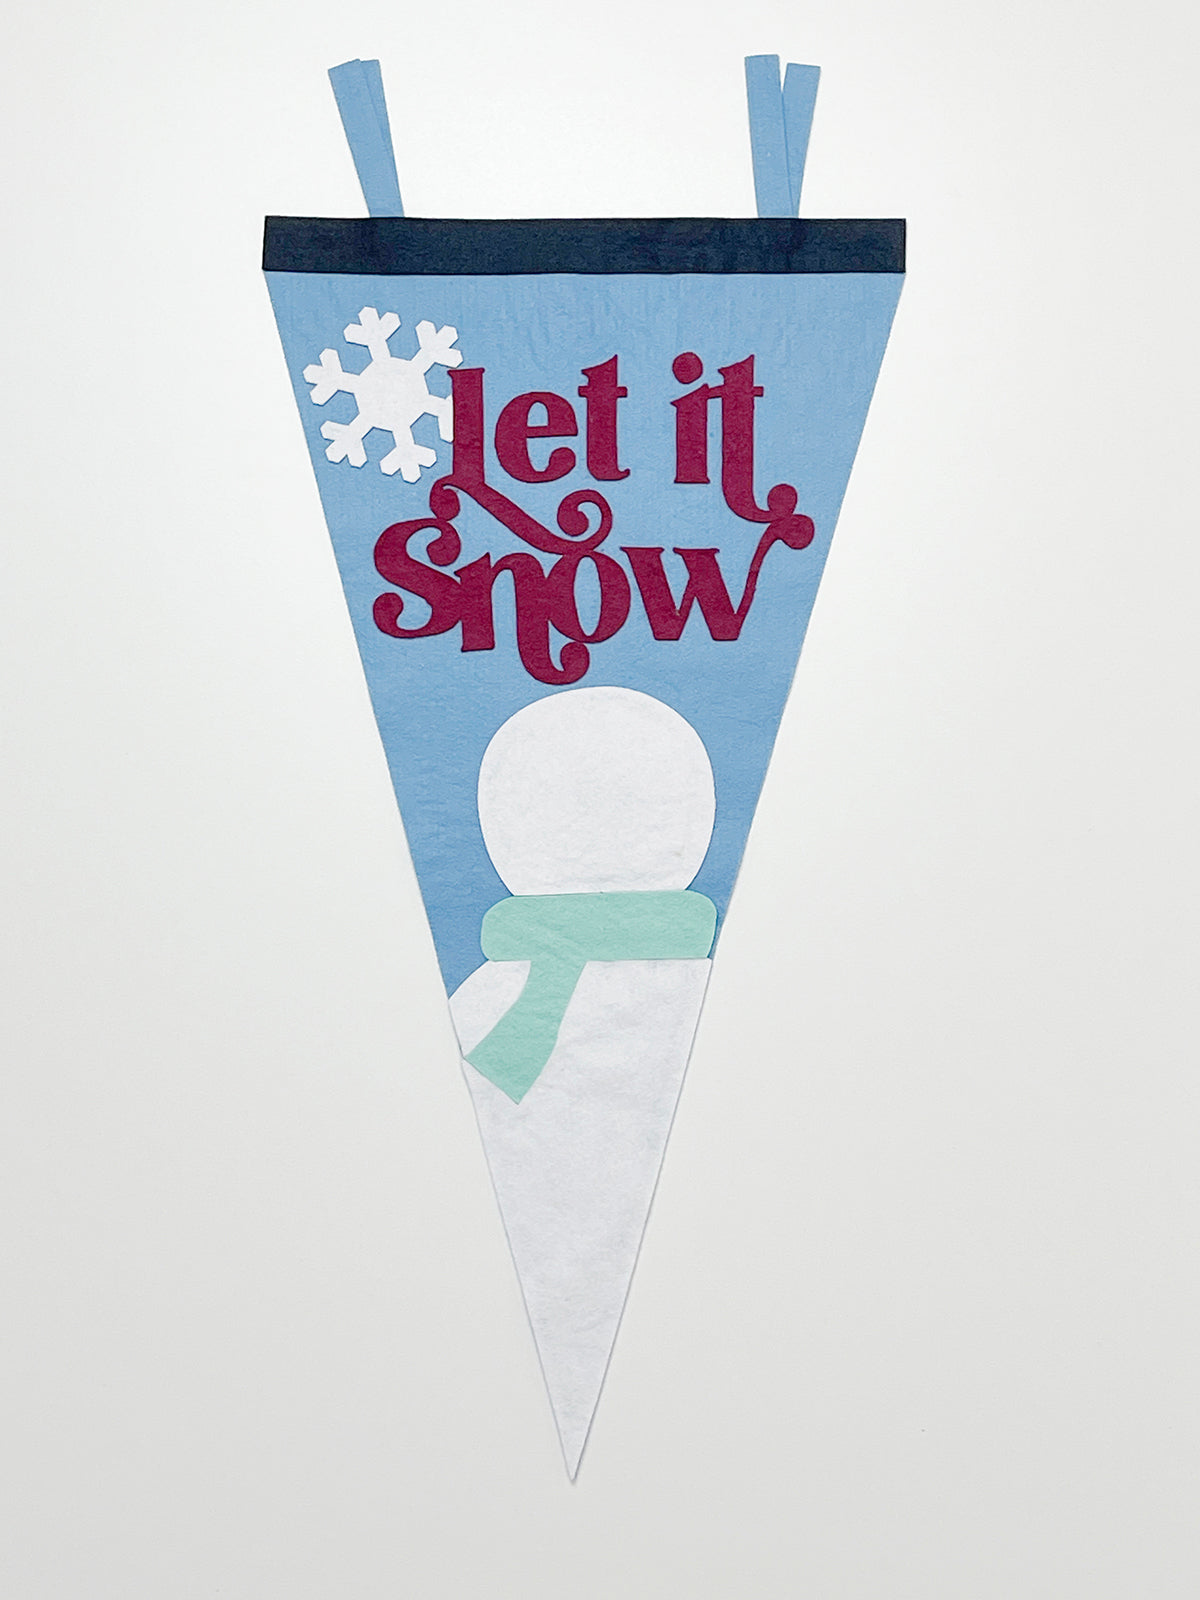 Bird's eye view of felt pennant under construction. Red lettering spells out 'Let it snow'. A white snowman with a mint green scarf is at the bottom of the pennant. The snowman has no facial features.